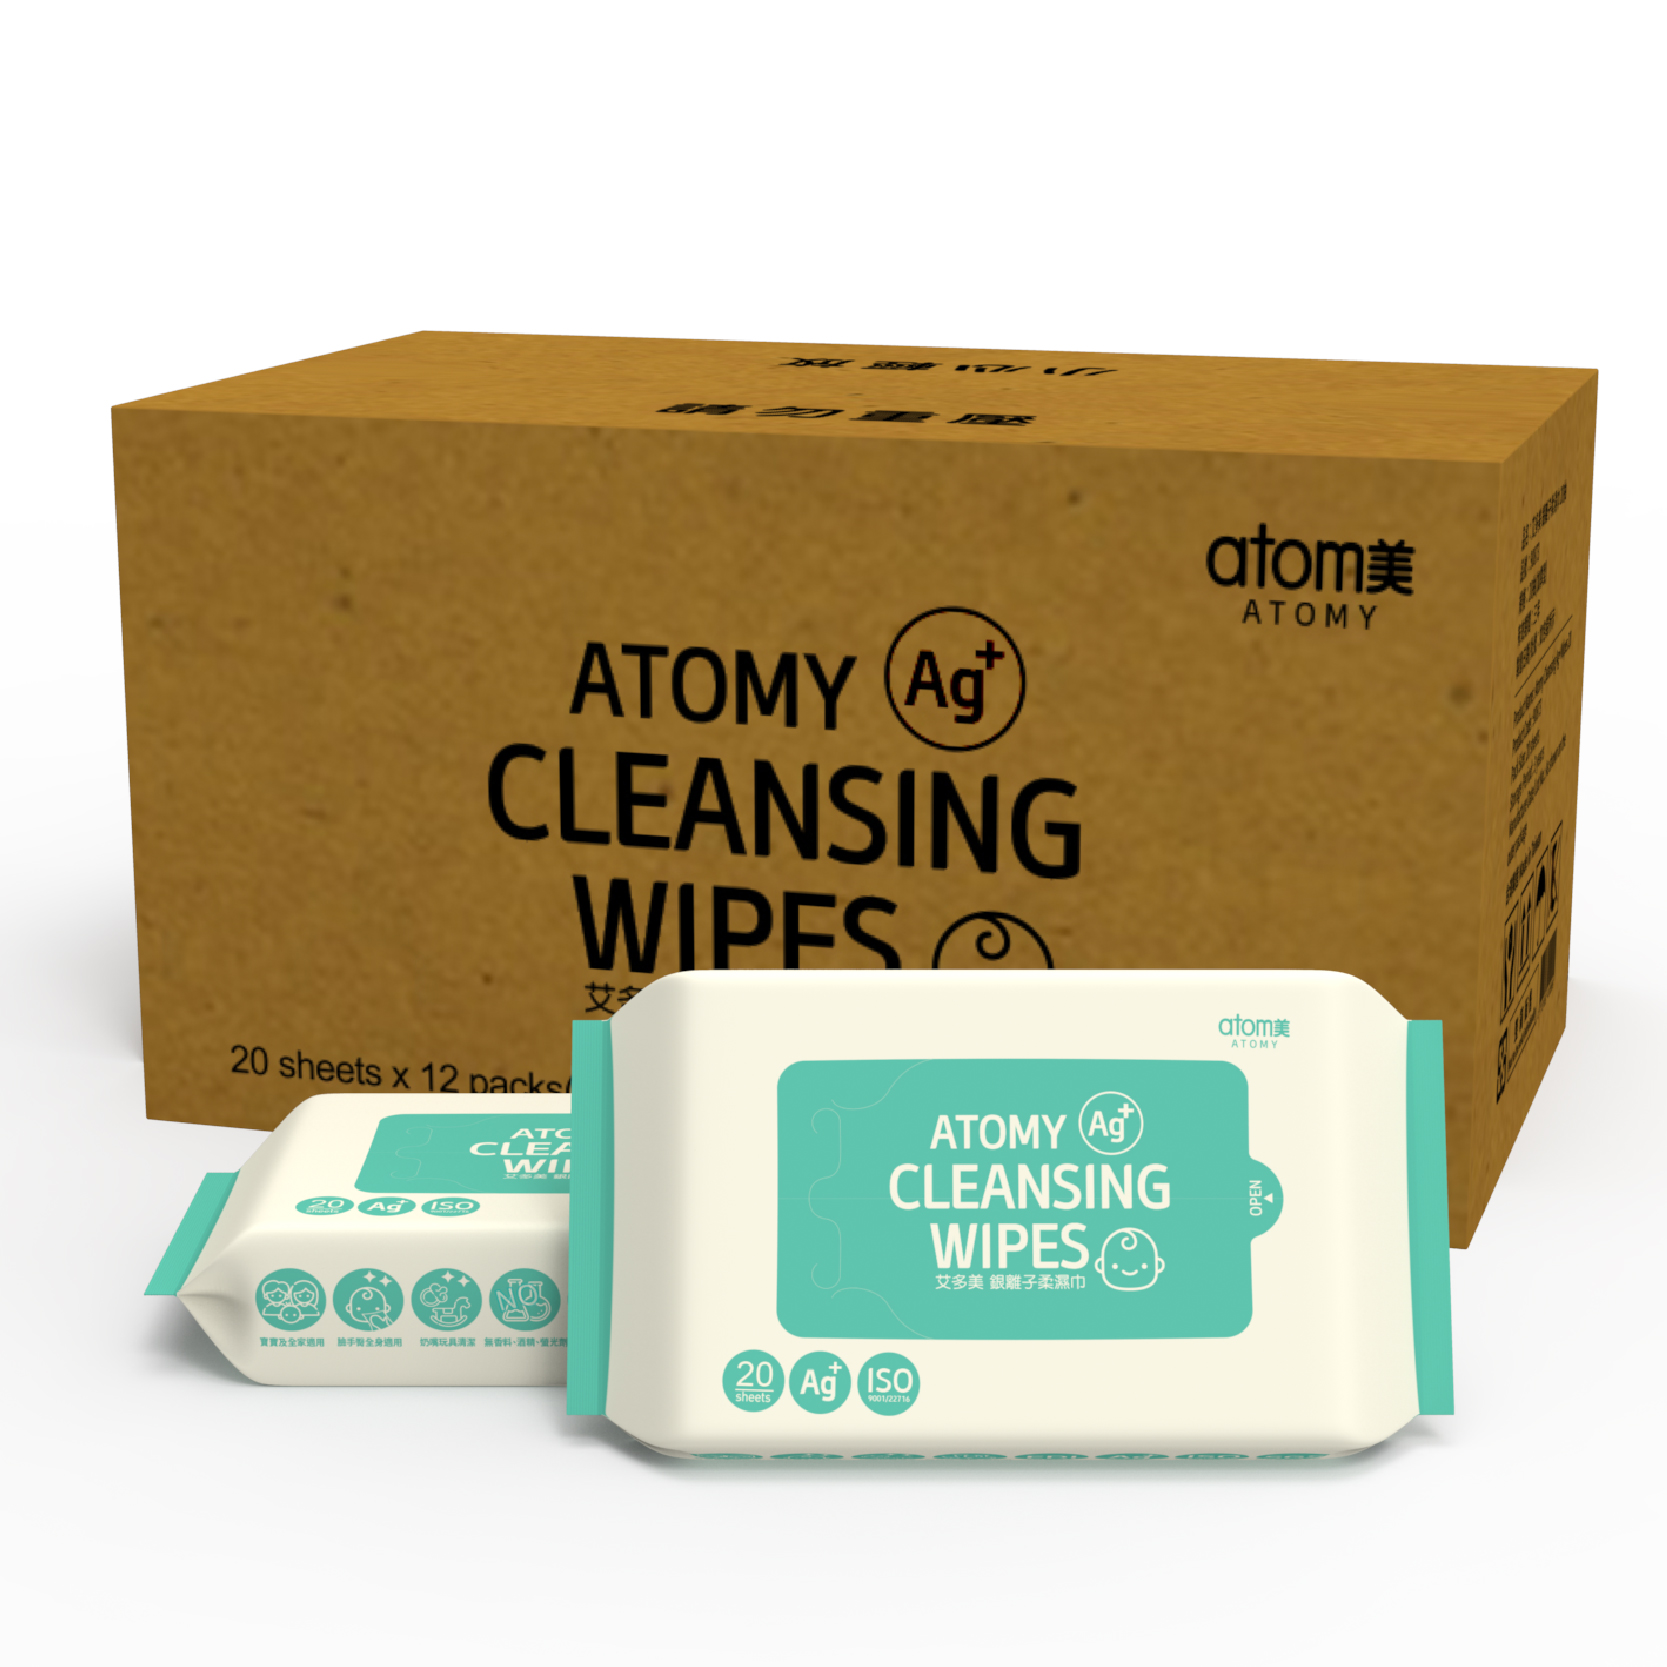 Atomy Ag+ Cleansing Wipes 20 Sheets (12 Packs)